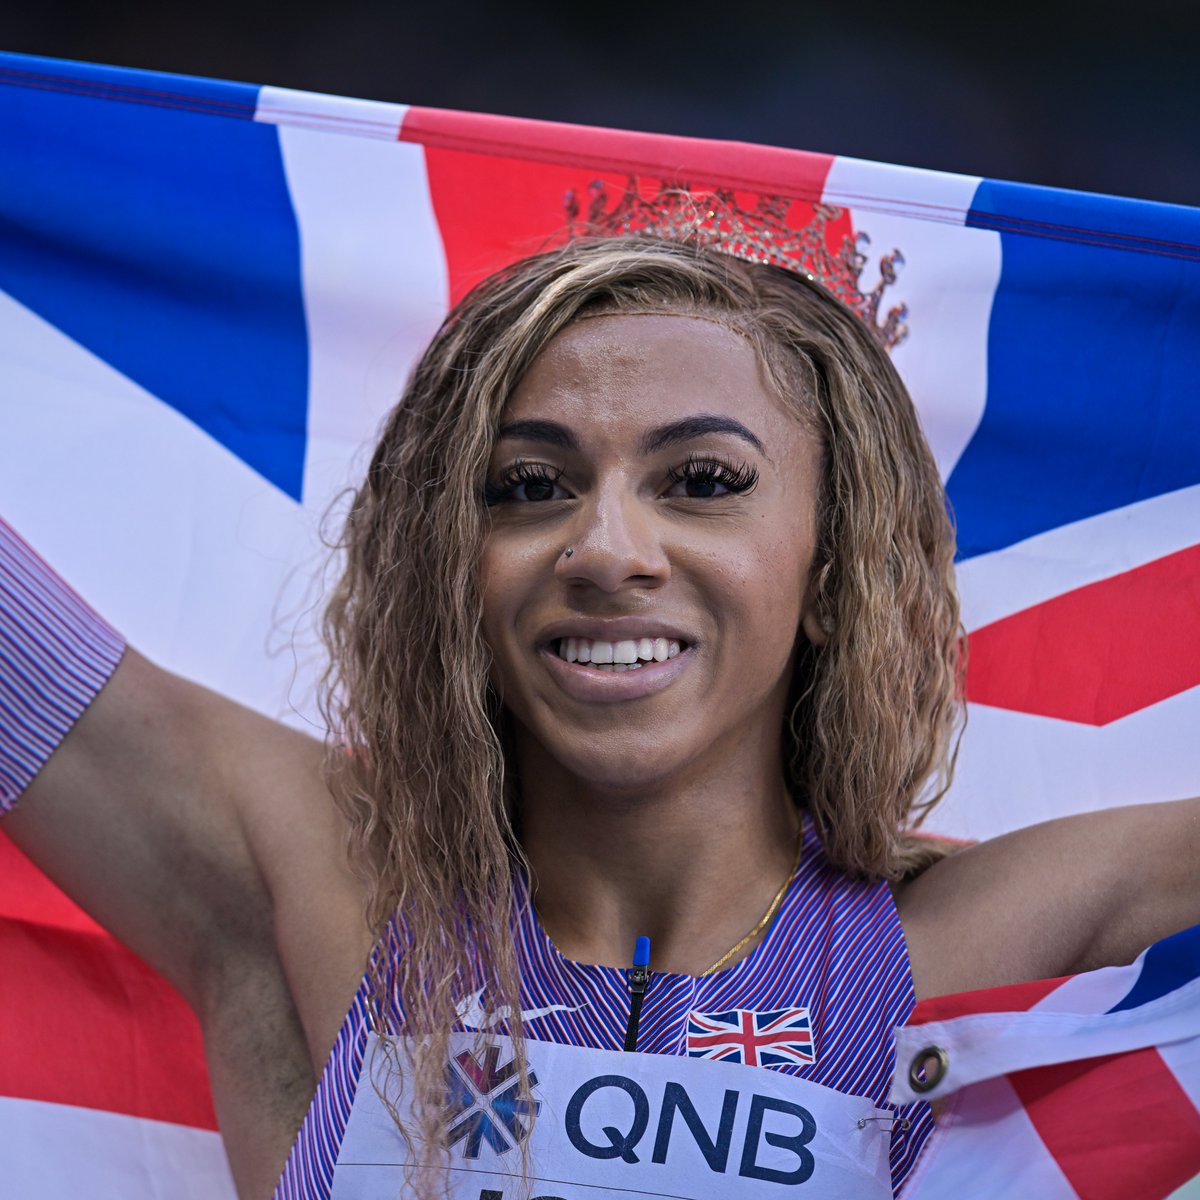 Selection policies for the World Athletics U20 Championships, Loughborough International and Mannheim International are now official. Click here to find out more ➡️ bit.ly/3UfNpvy